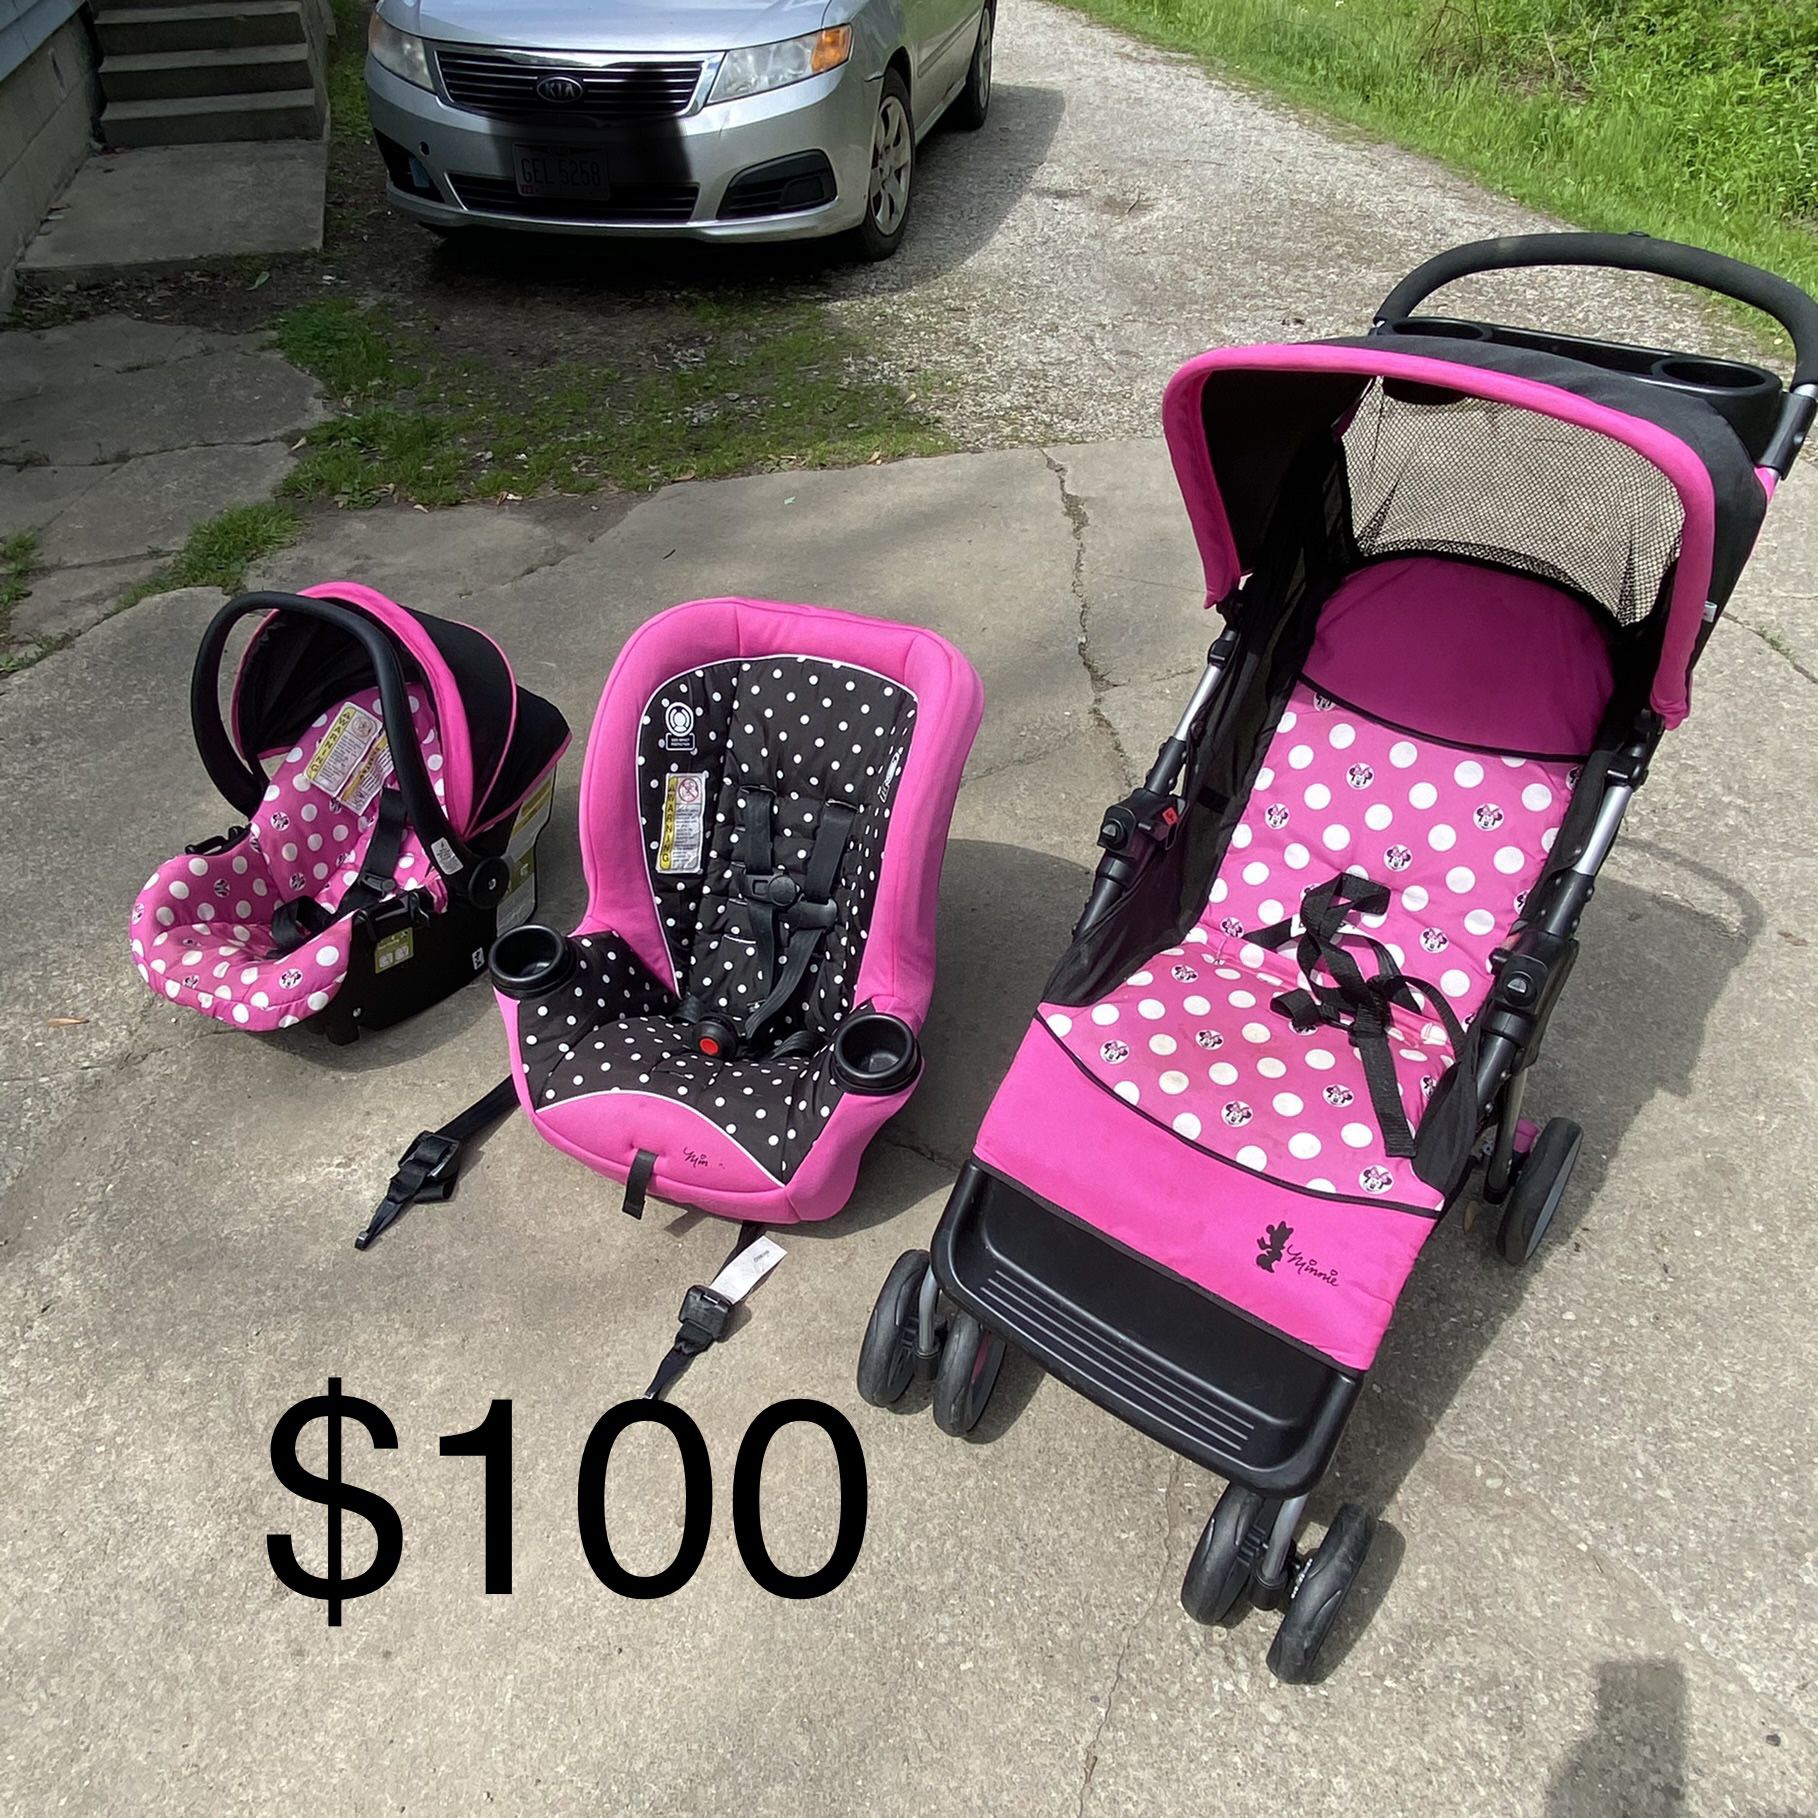 Minnie mouse infant carrier car seat, toddler car seat, and stroller